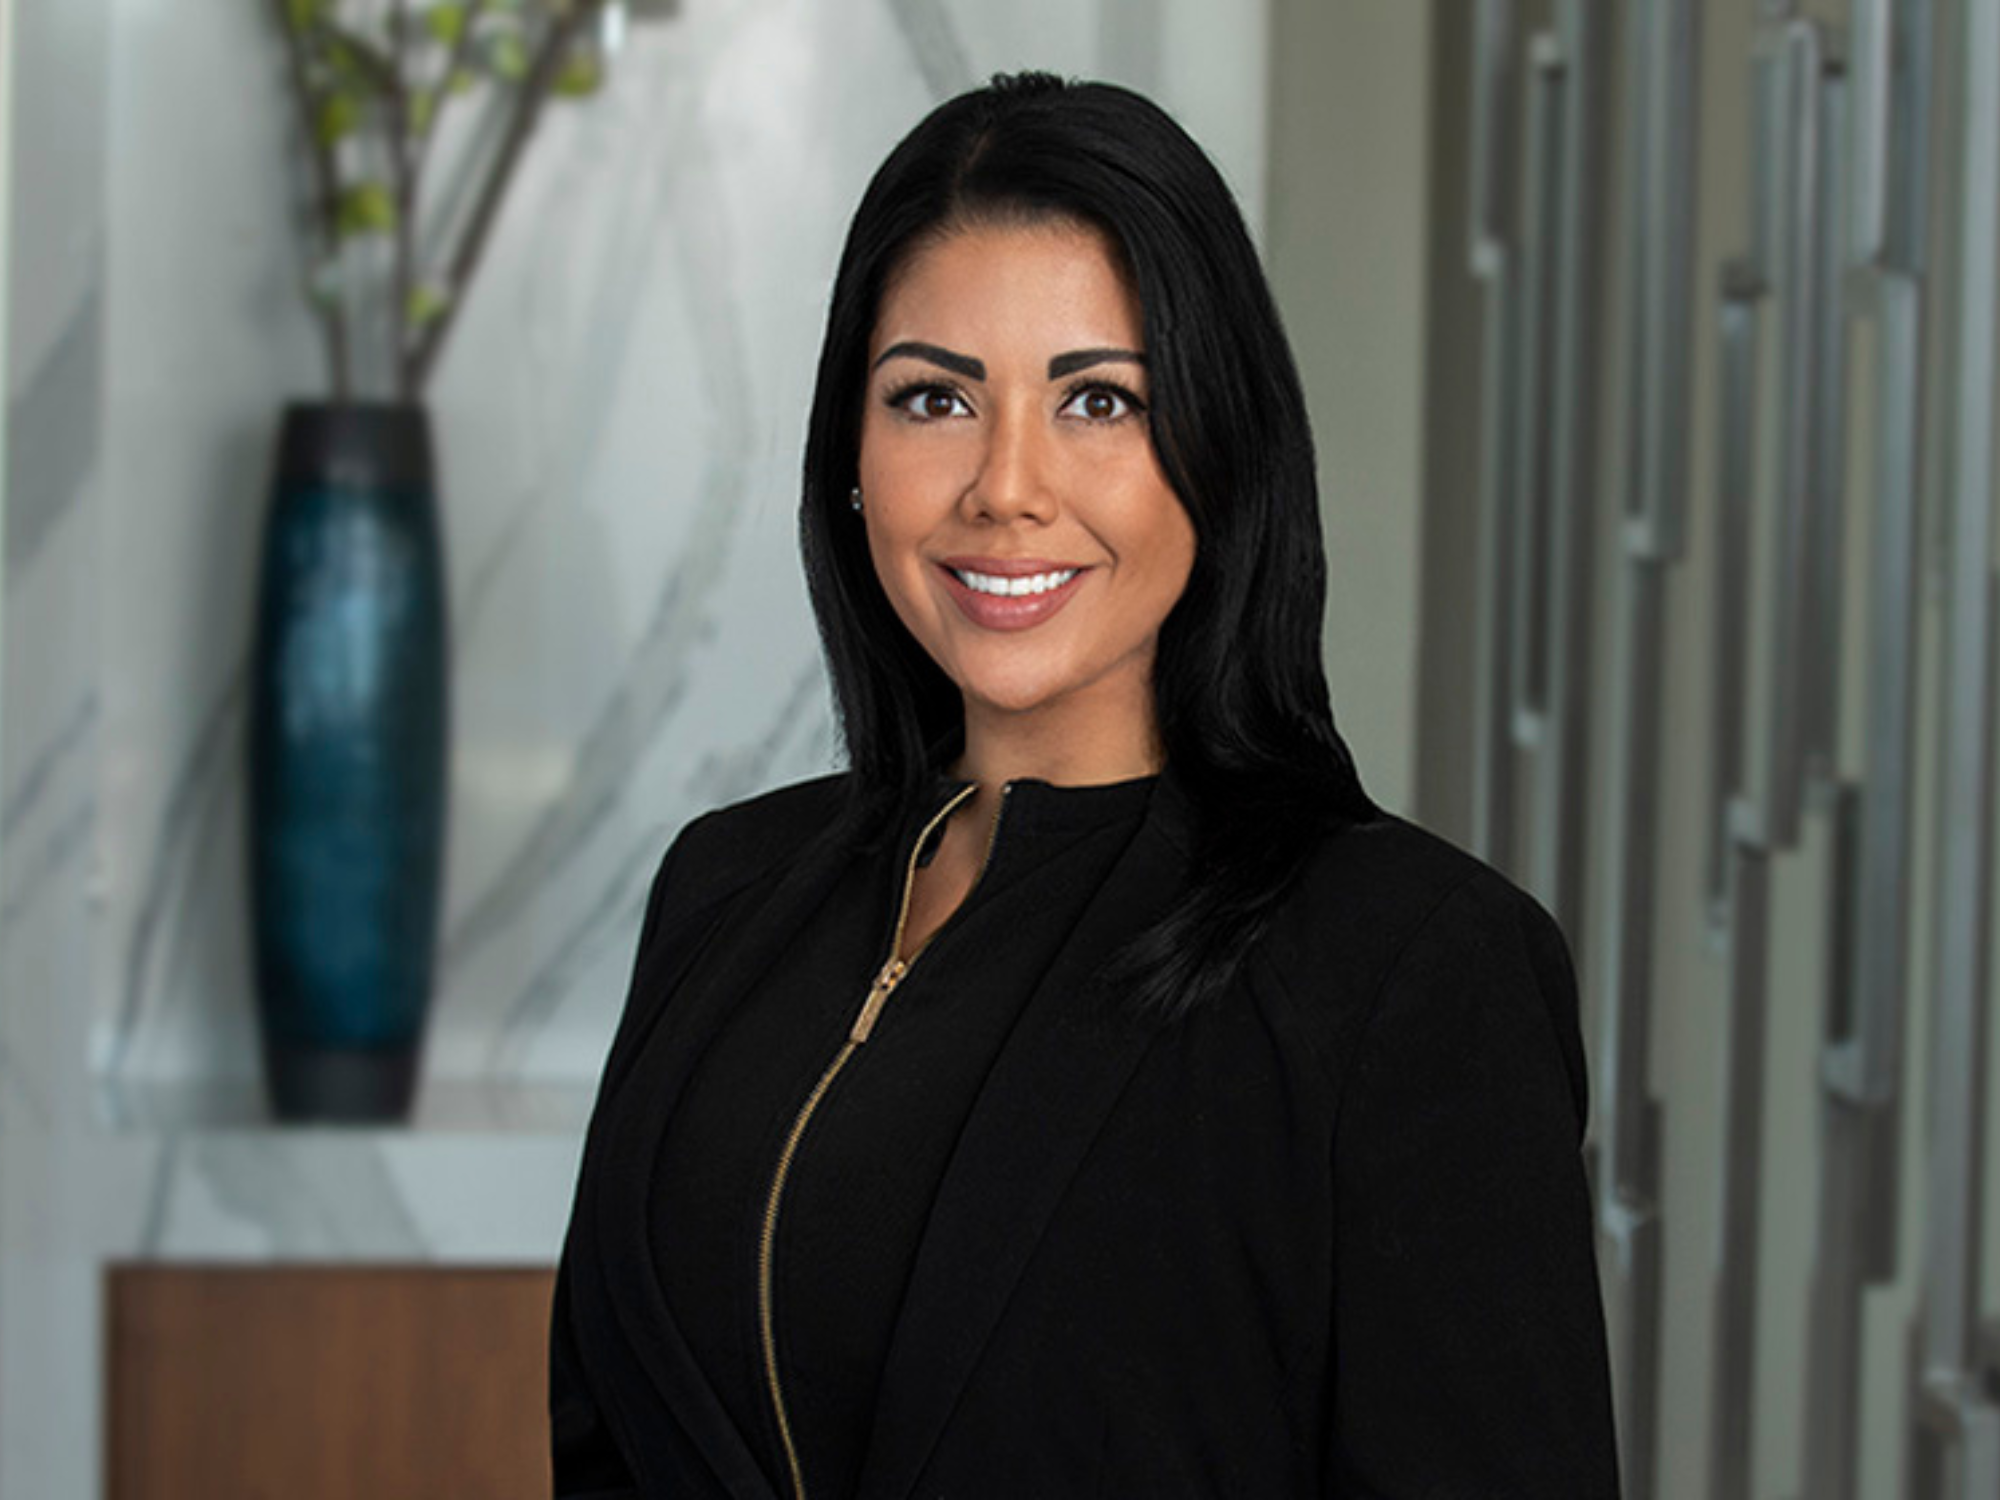 MEET TANYA MAURO, PROPERTY RELATIONS COORDINATOR AT THE FRANKLIN RESIDENCES